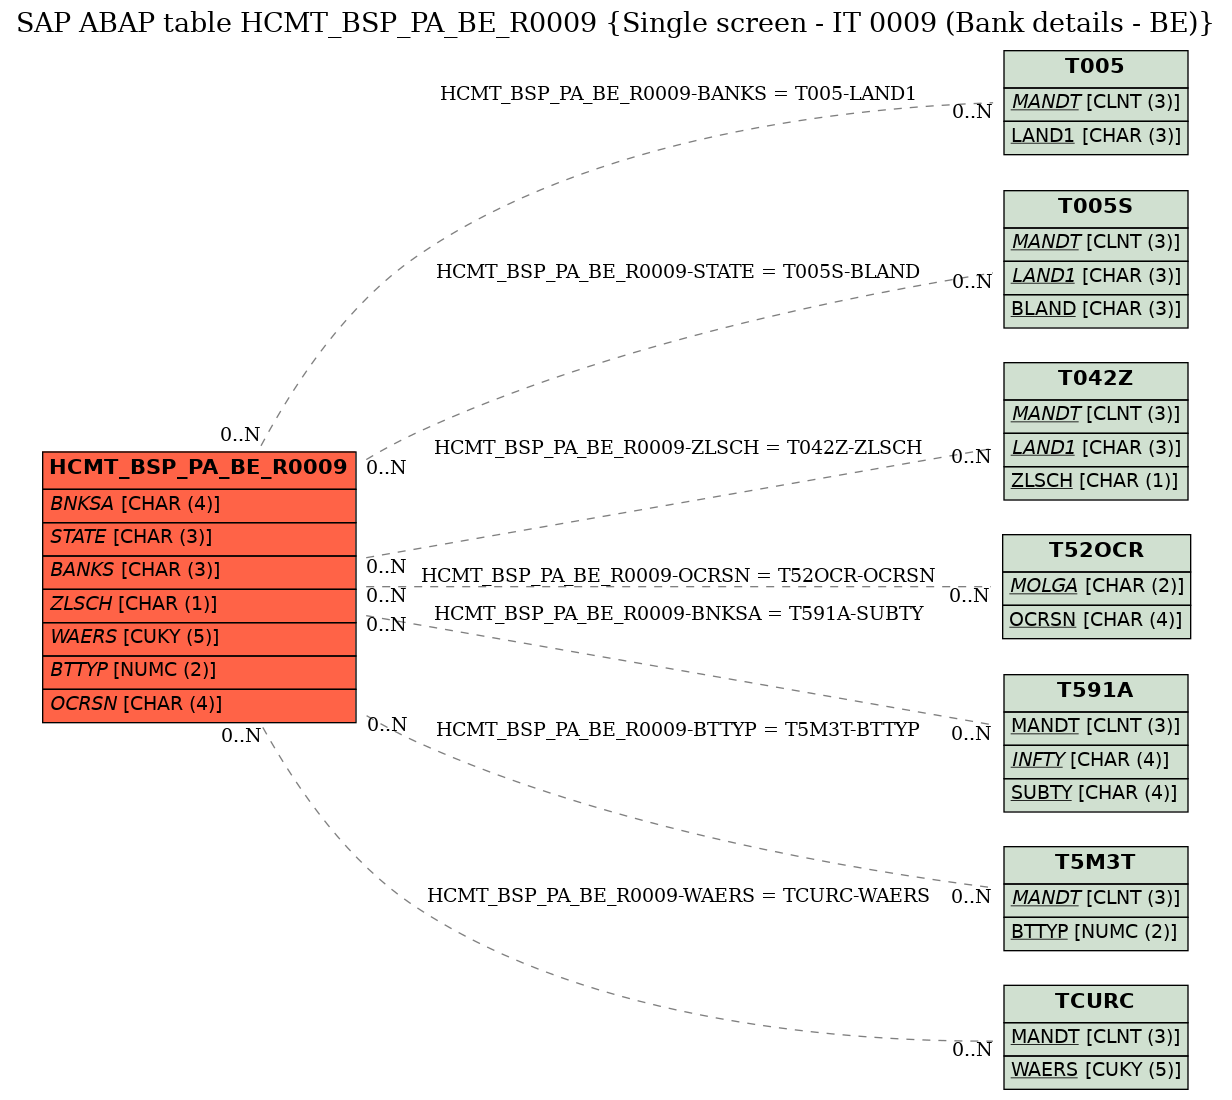 E-R Diagram for table HCMT_BSP_PA_BE_R0009 (Single screen - IT 0009 (Bank details - BE))